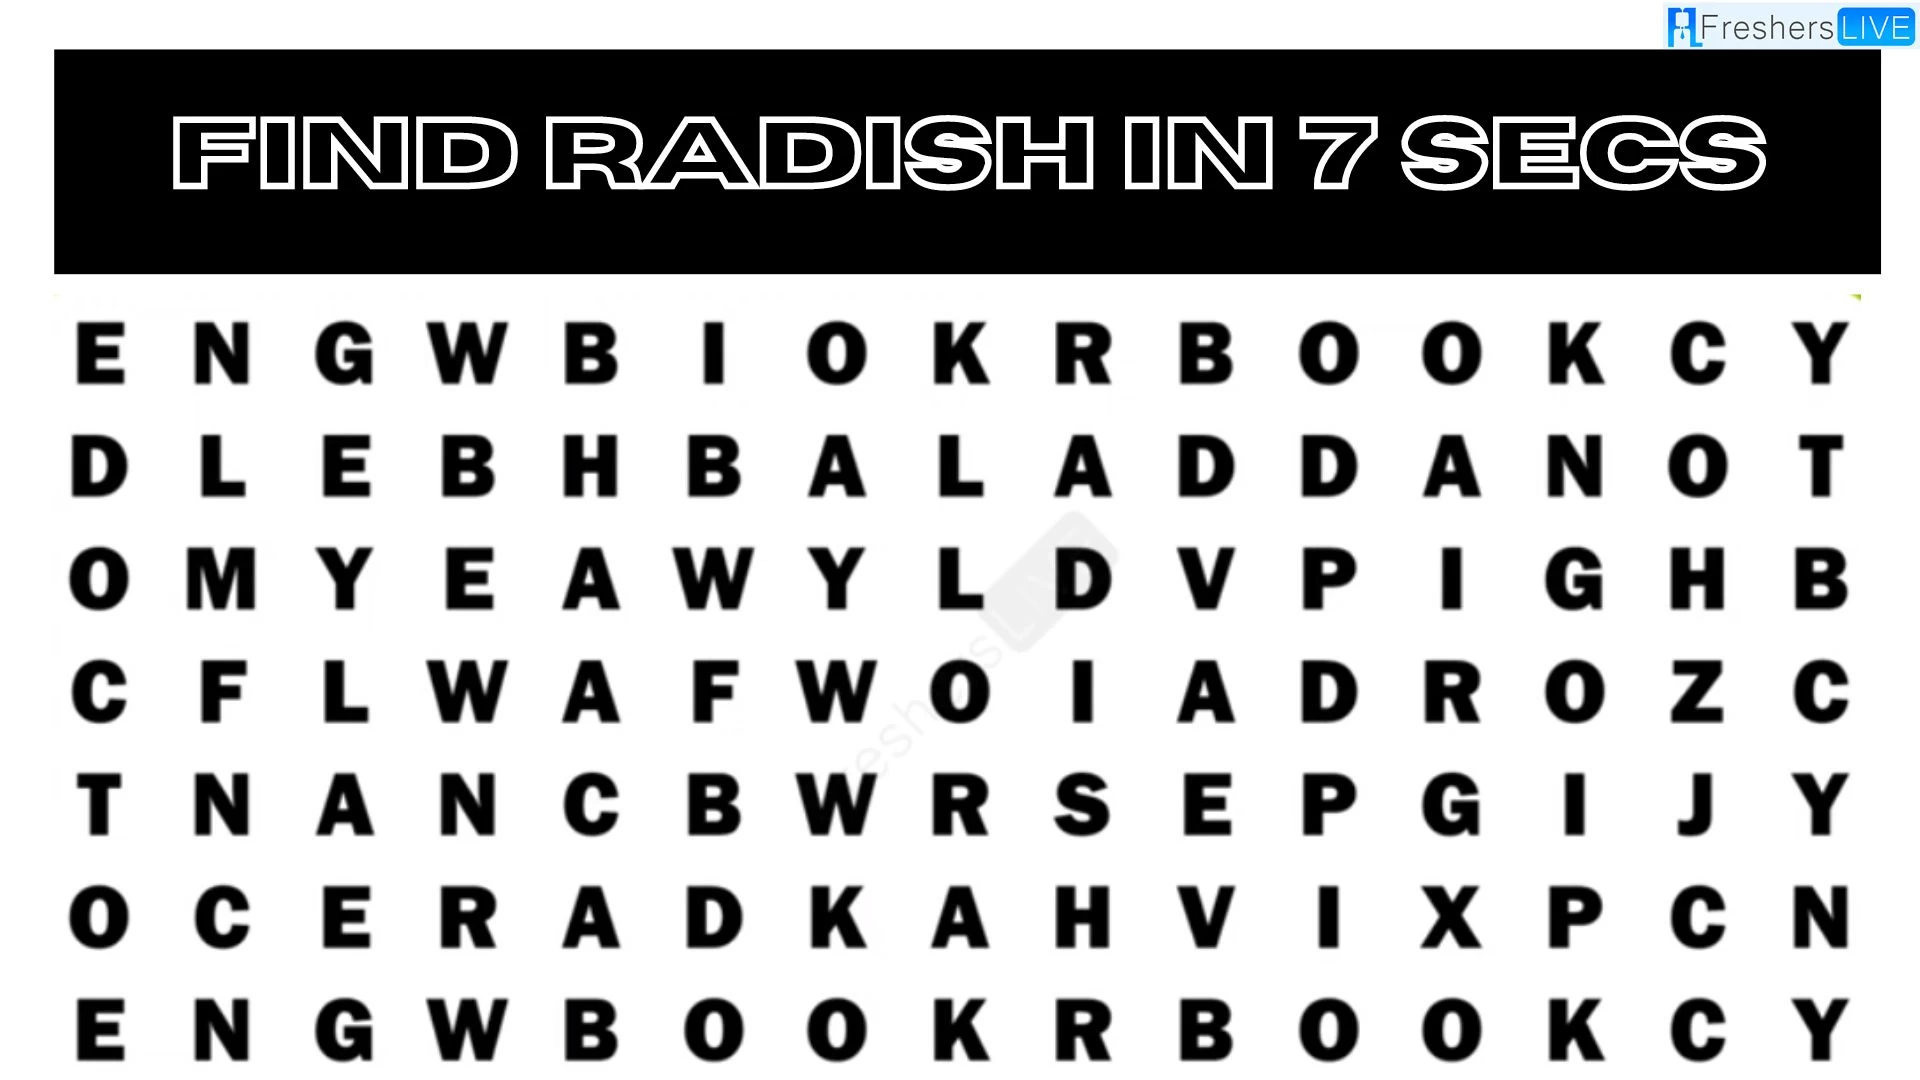 Are you smart enough to Find the word Radish in the Word Puzzle in Less than 7 Seconds